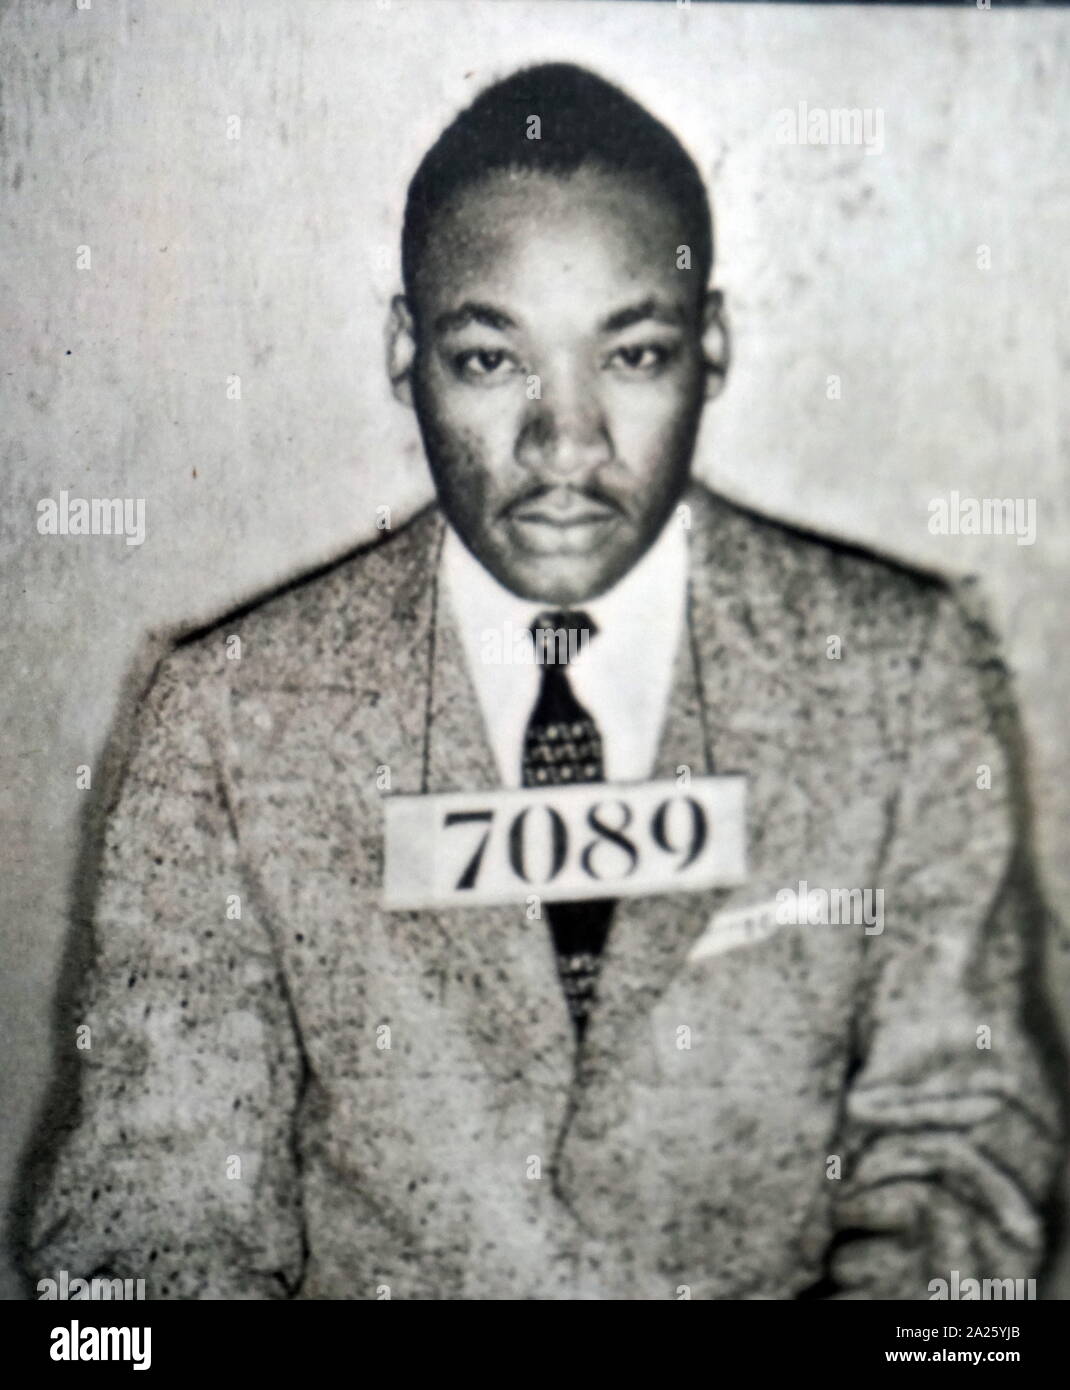 Mug shot of Martin Luther King, Jr. . Martin Luther King, Jr. (1929-1968) an American Baptist minister and activist during the civil rights movement from 1954 until his death. Stock Photo